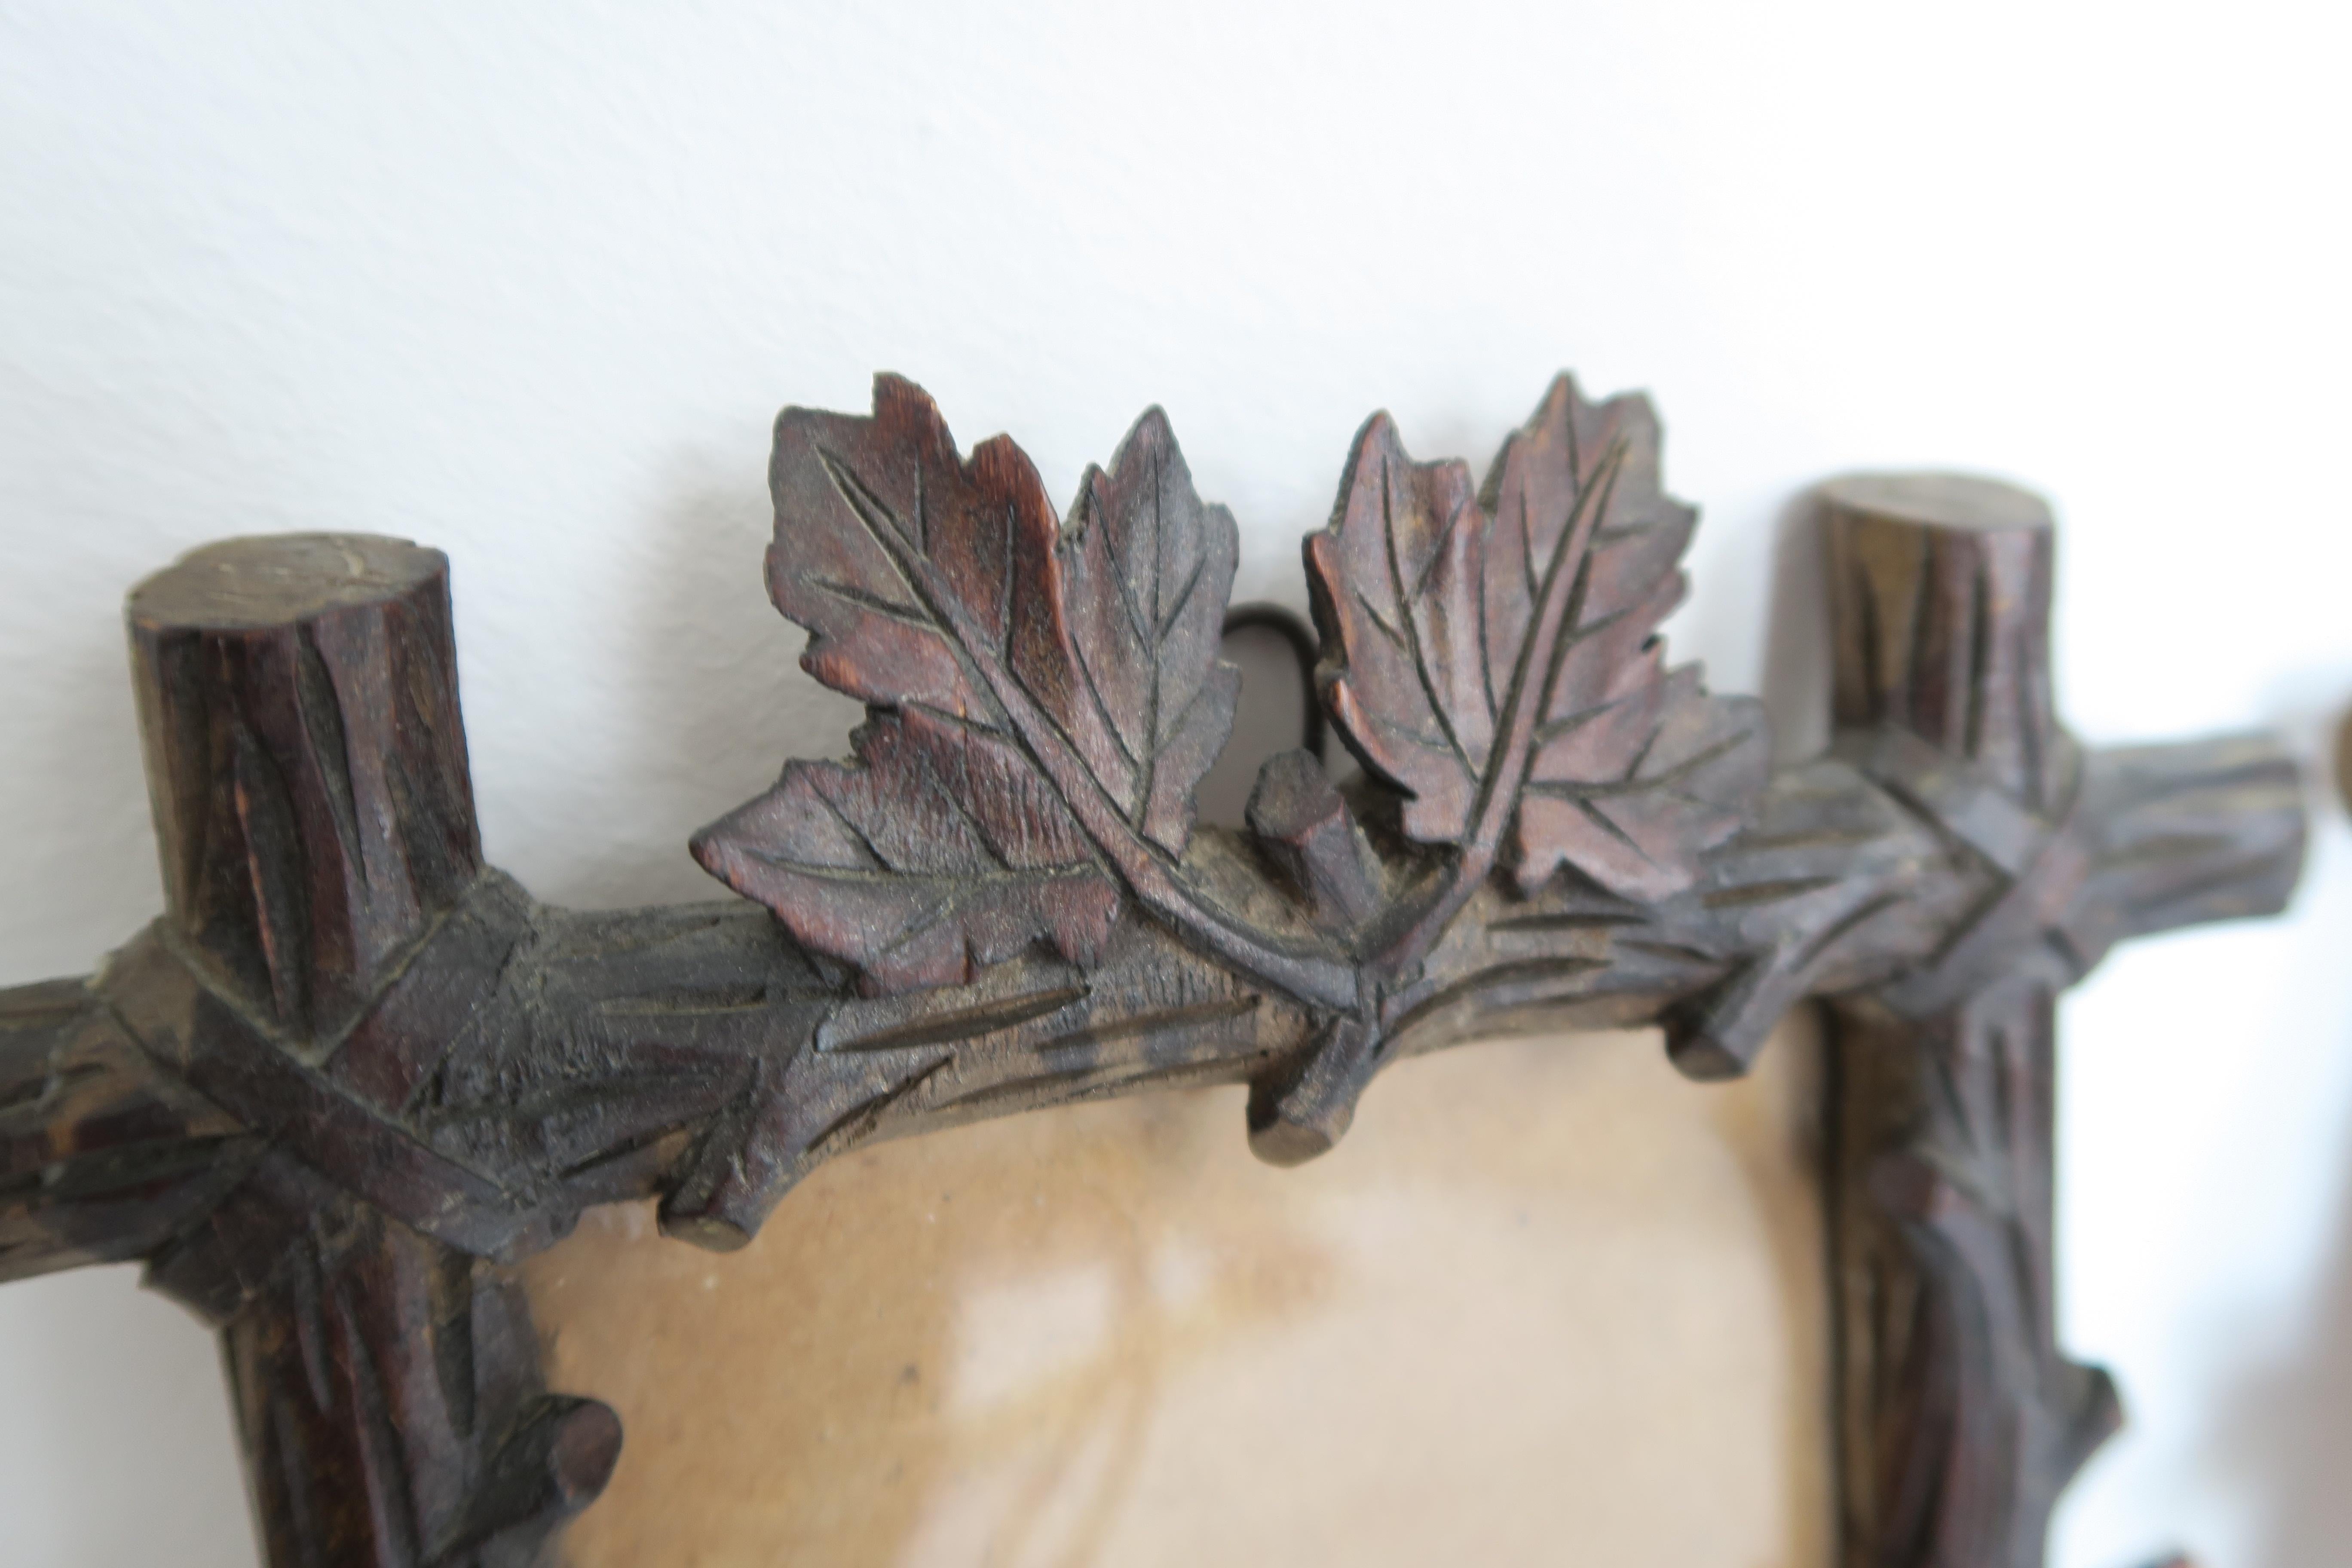 For sale is a set of two unique Blackforest wooden pictureframes. The Frames have been hand carved in the shape of branches and maple leaves. The come complete with glass, some cardboard back panels and little nails for fixture. The were